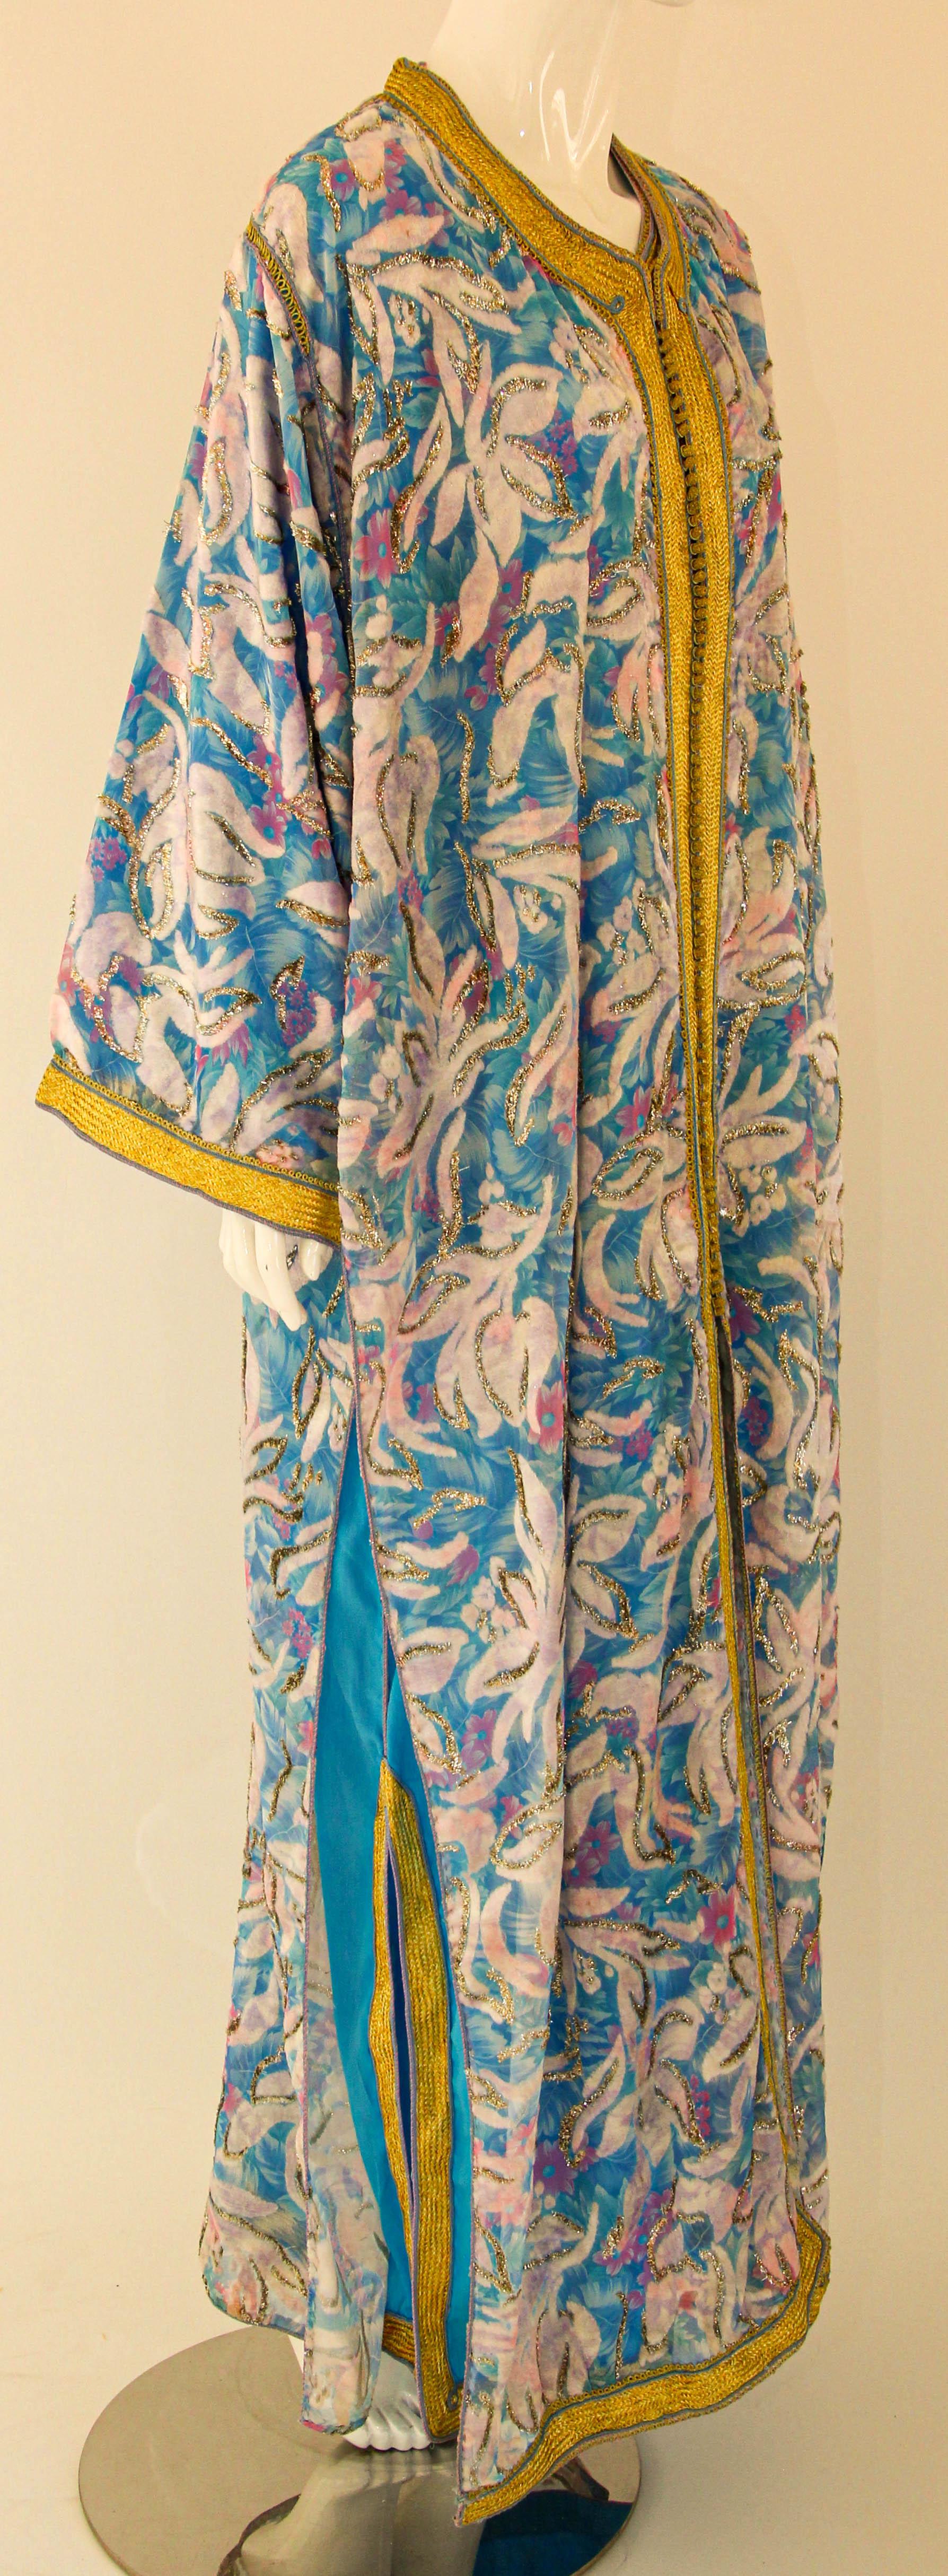 1960s Moroccan Caftan Floral Silk Vintage Turquoise and Gold Kaftan, caftan set, under garment in solid turquoise blue satin with gold trim and over garment see through floral silk.
Elegant Moroccan caftan metallic silk floral brocade, turquoise